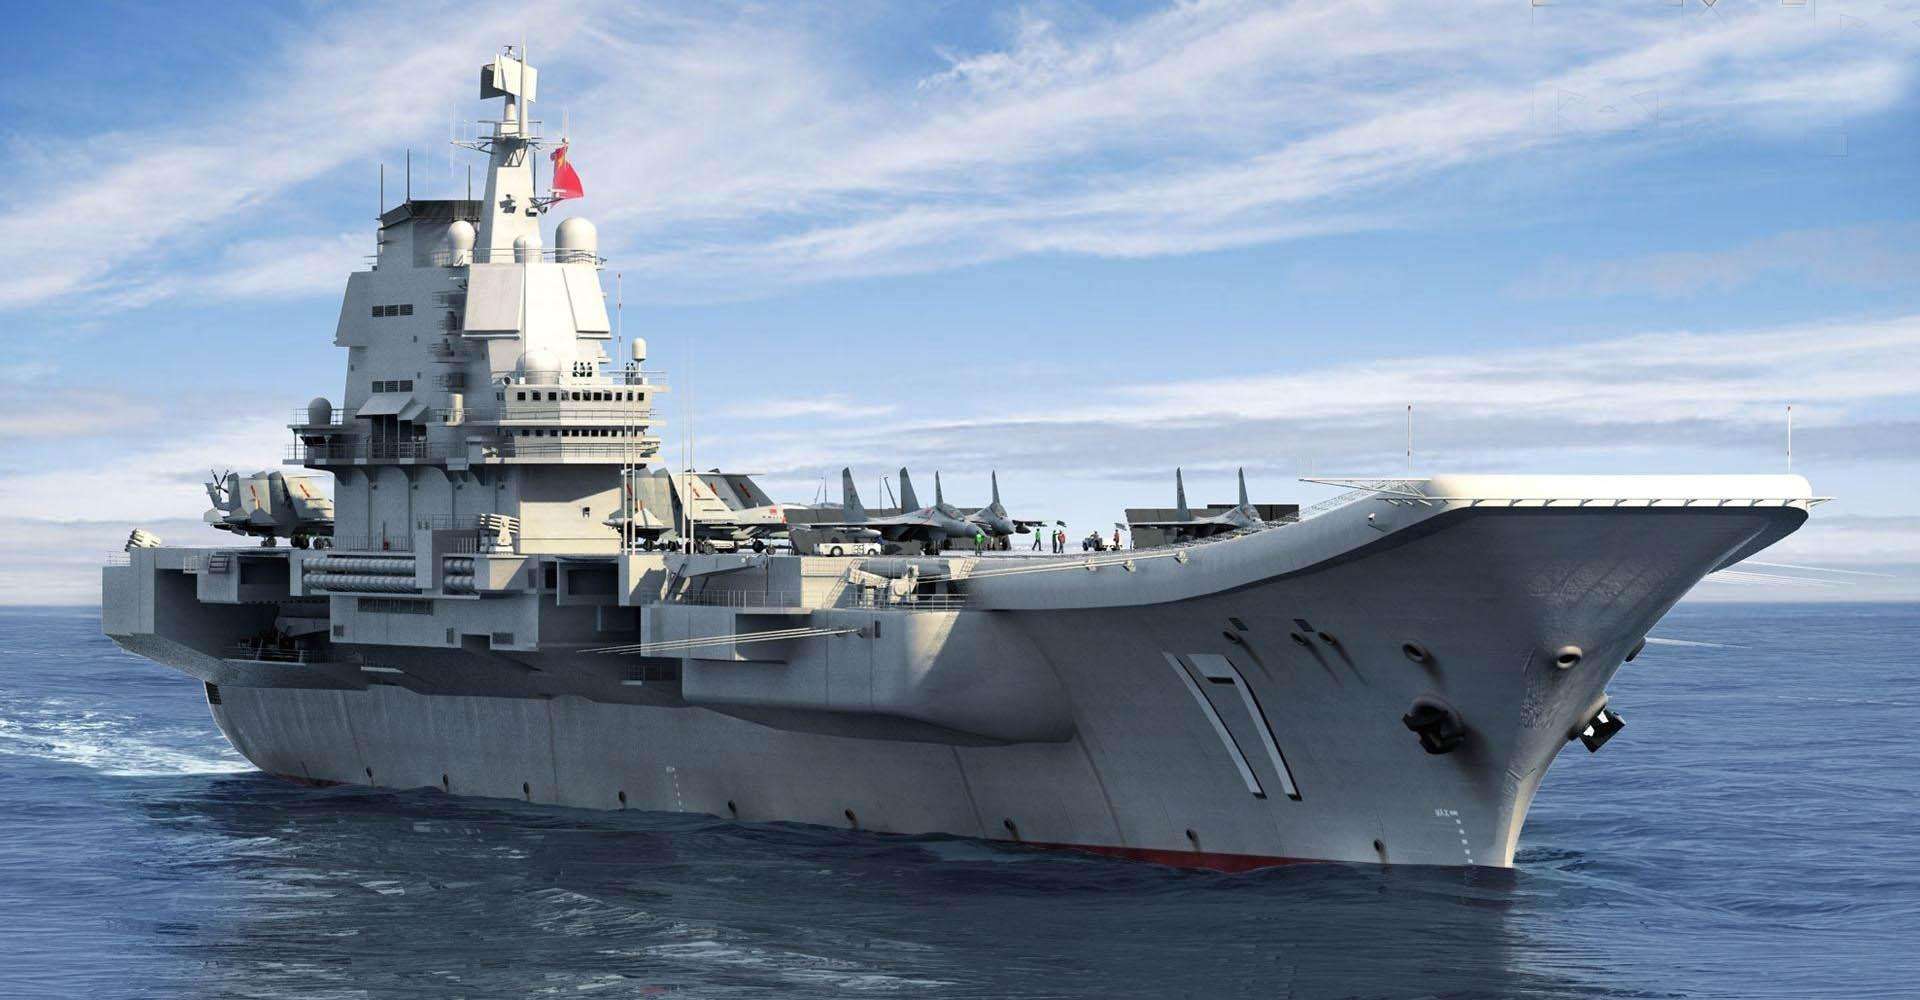 What do we know so far about China's second aircraft carrier? | ChinaPower Project